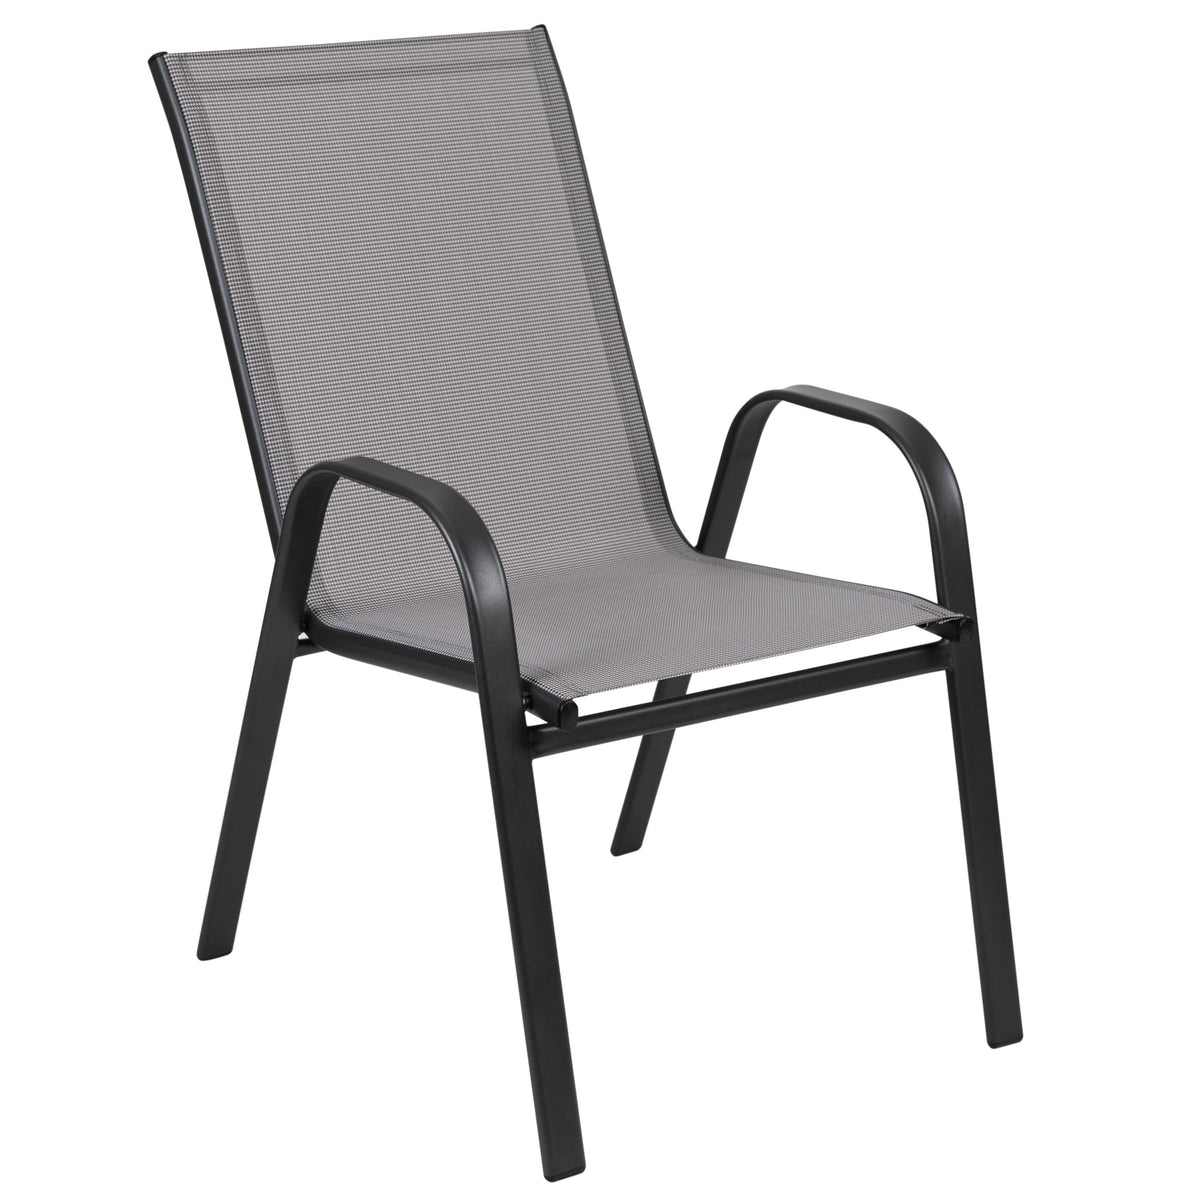 Gray |#| Commercial 7 Pc Outdoor Patio Dining Set with Glass Table and 6 Chairs - Gray